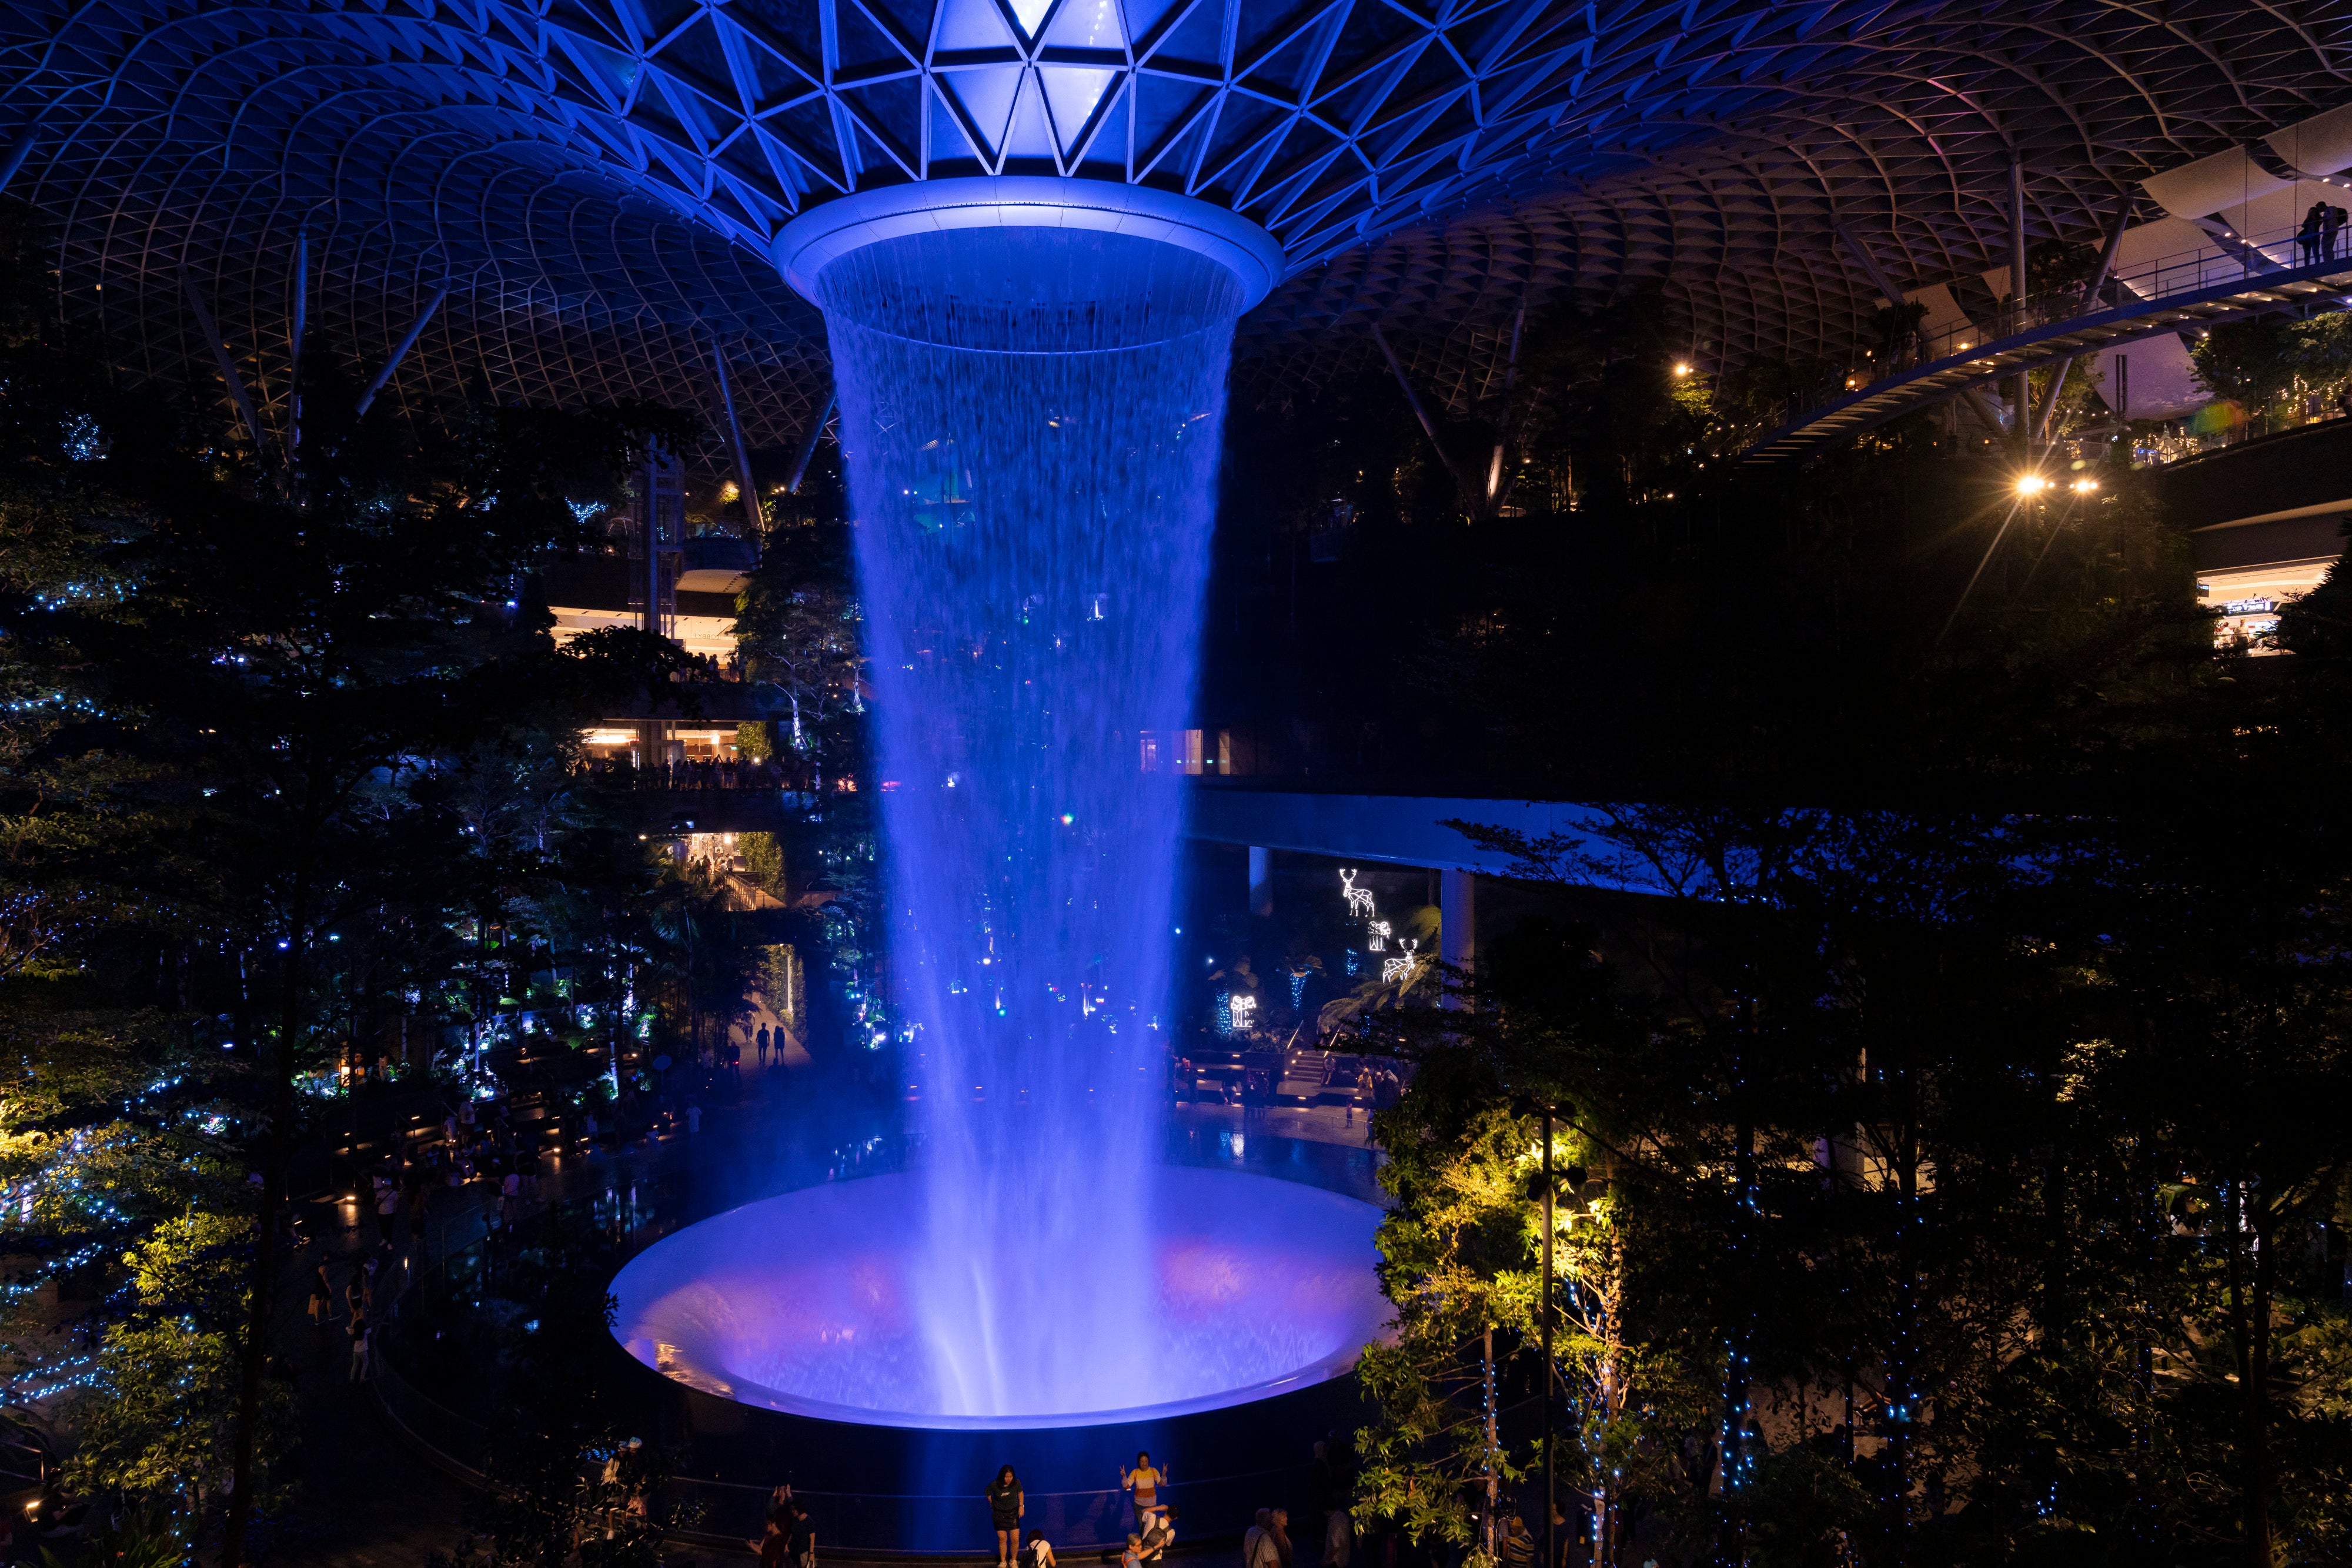 A view of the Rain Vortex Jewel - the world’s tallest indoor waterfall - at Singapore Changi